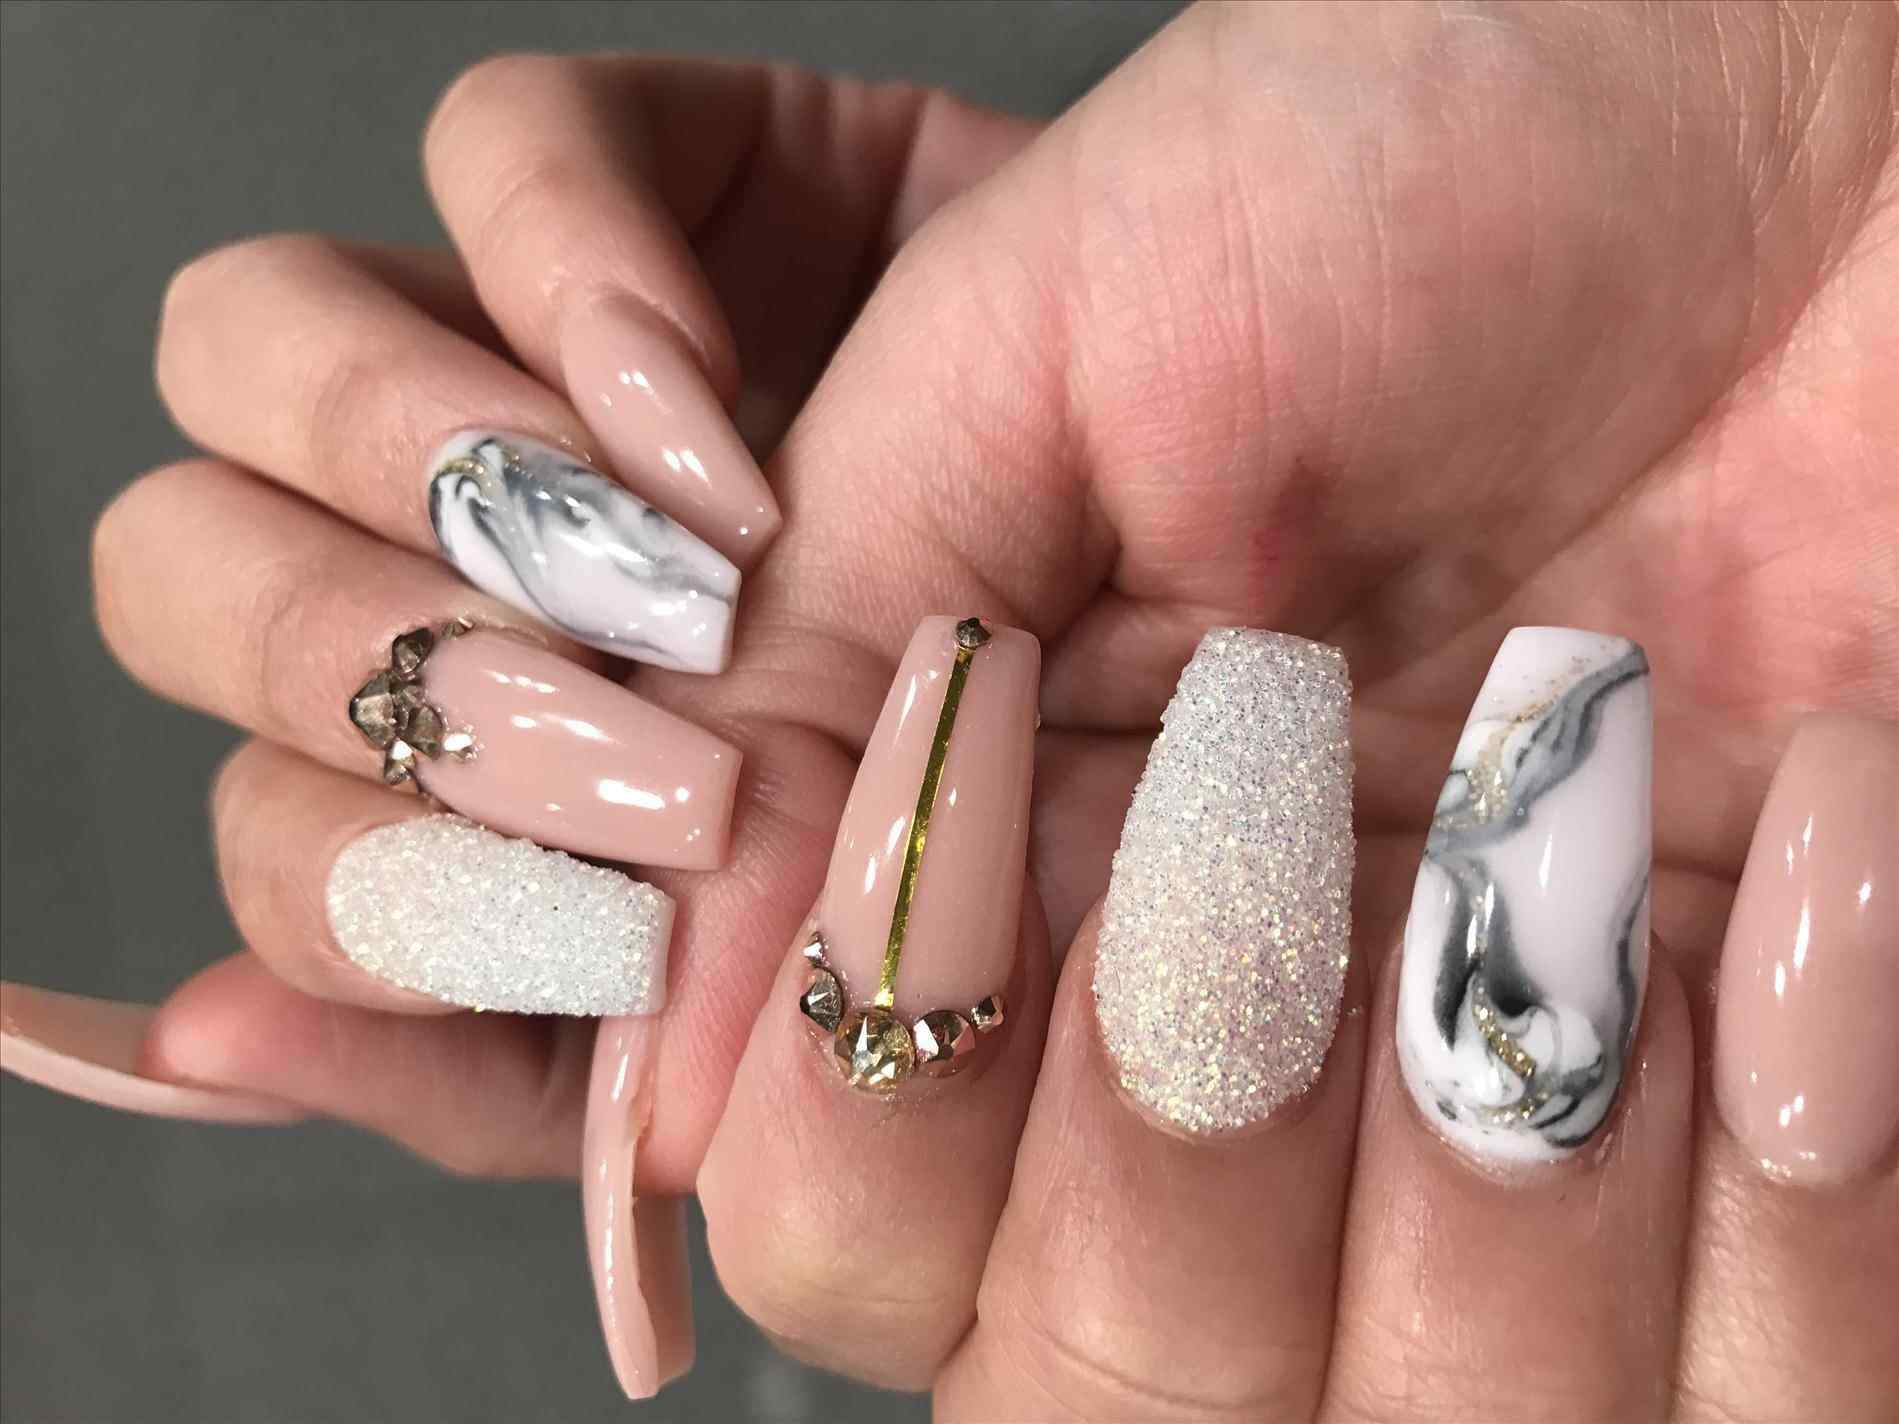 Perfect manicure and natural nails